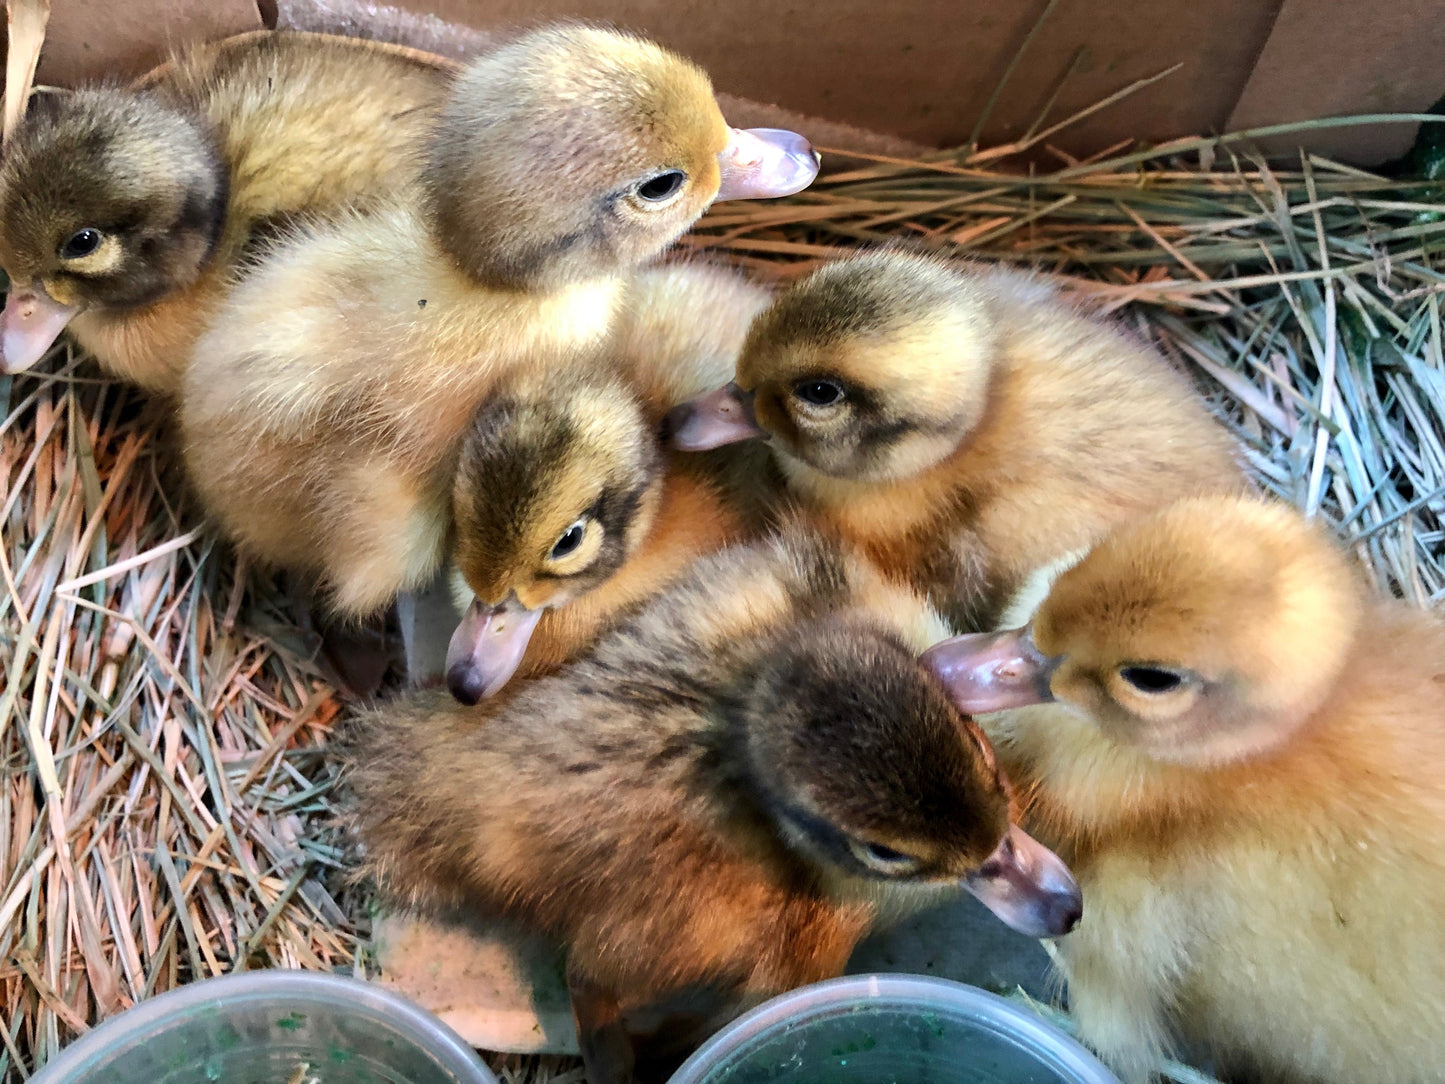 Canetons/Ducklings